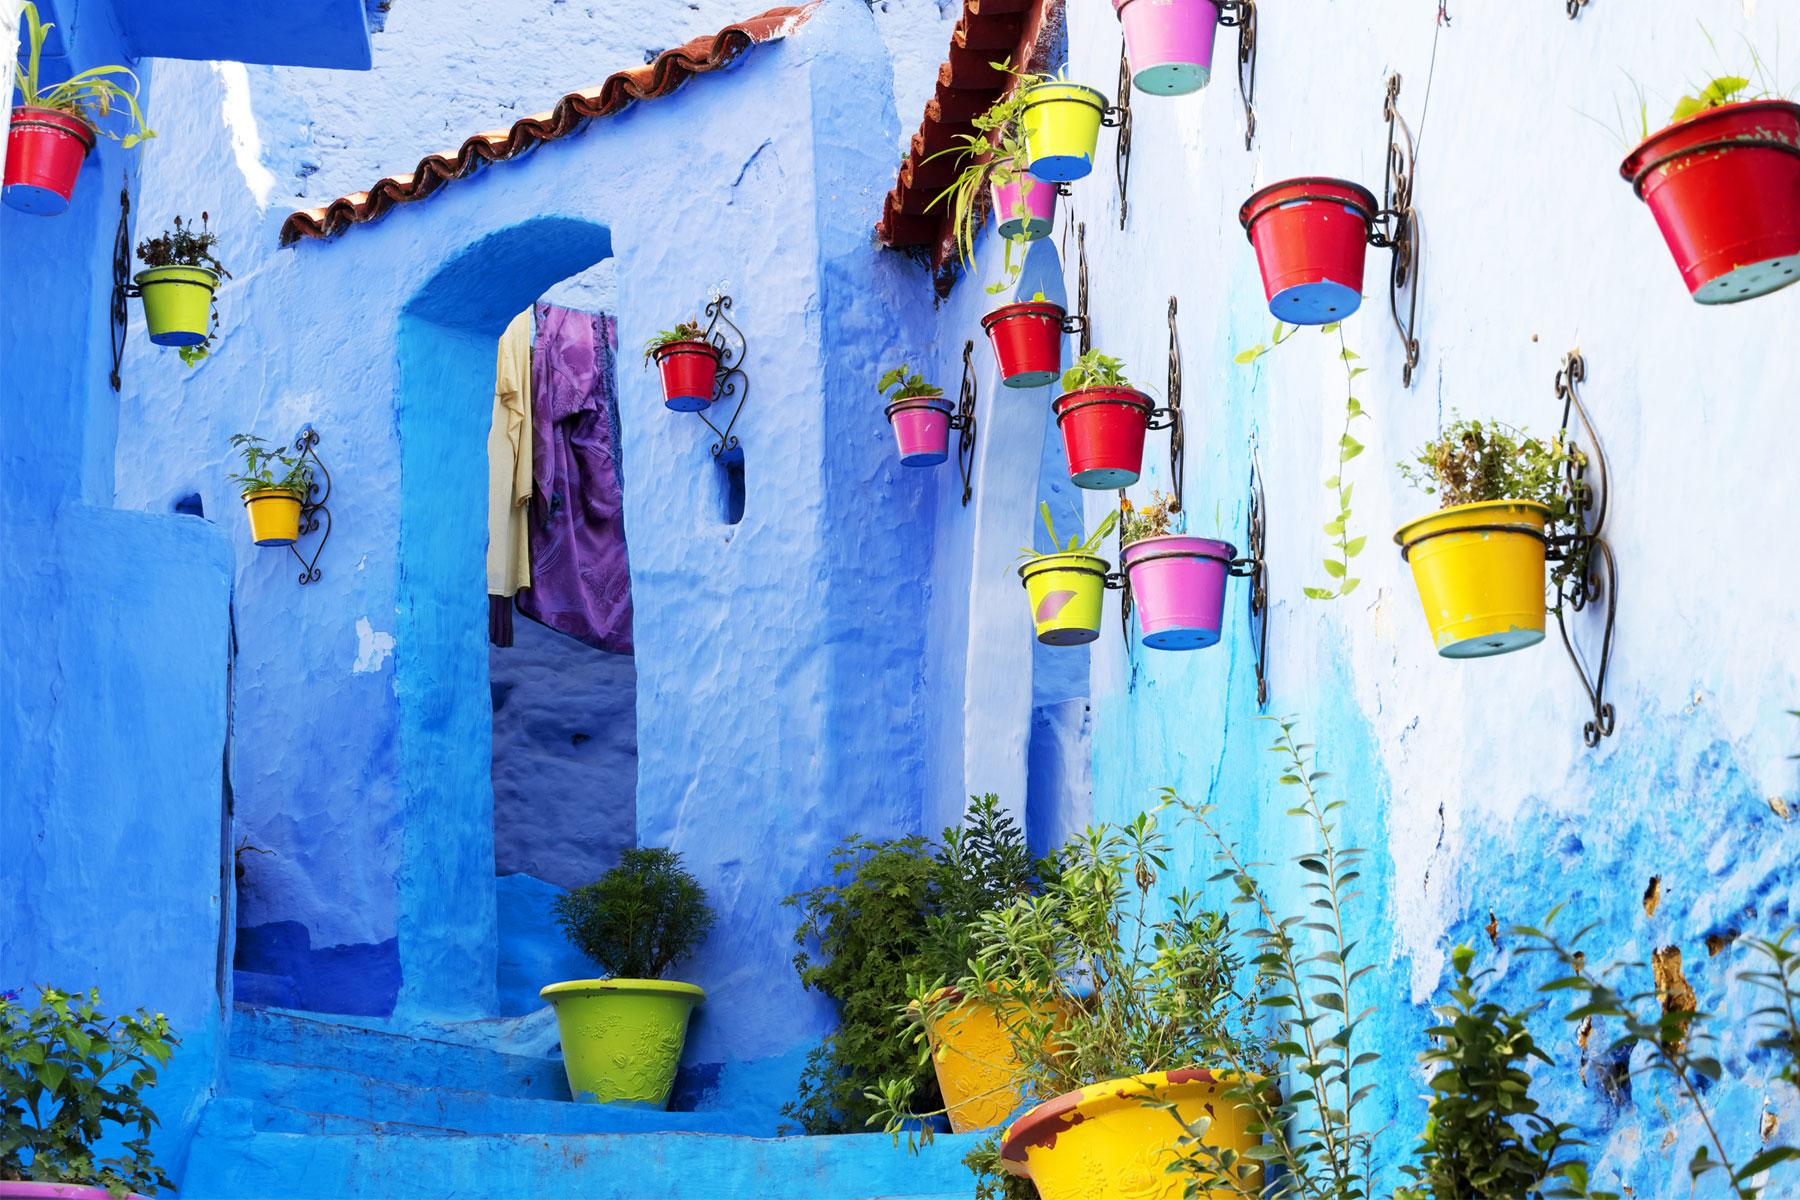 The 25 Most Colorful Towns in the World - Fodors Travel Guide